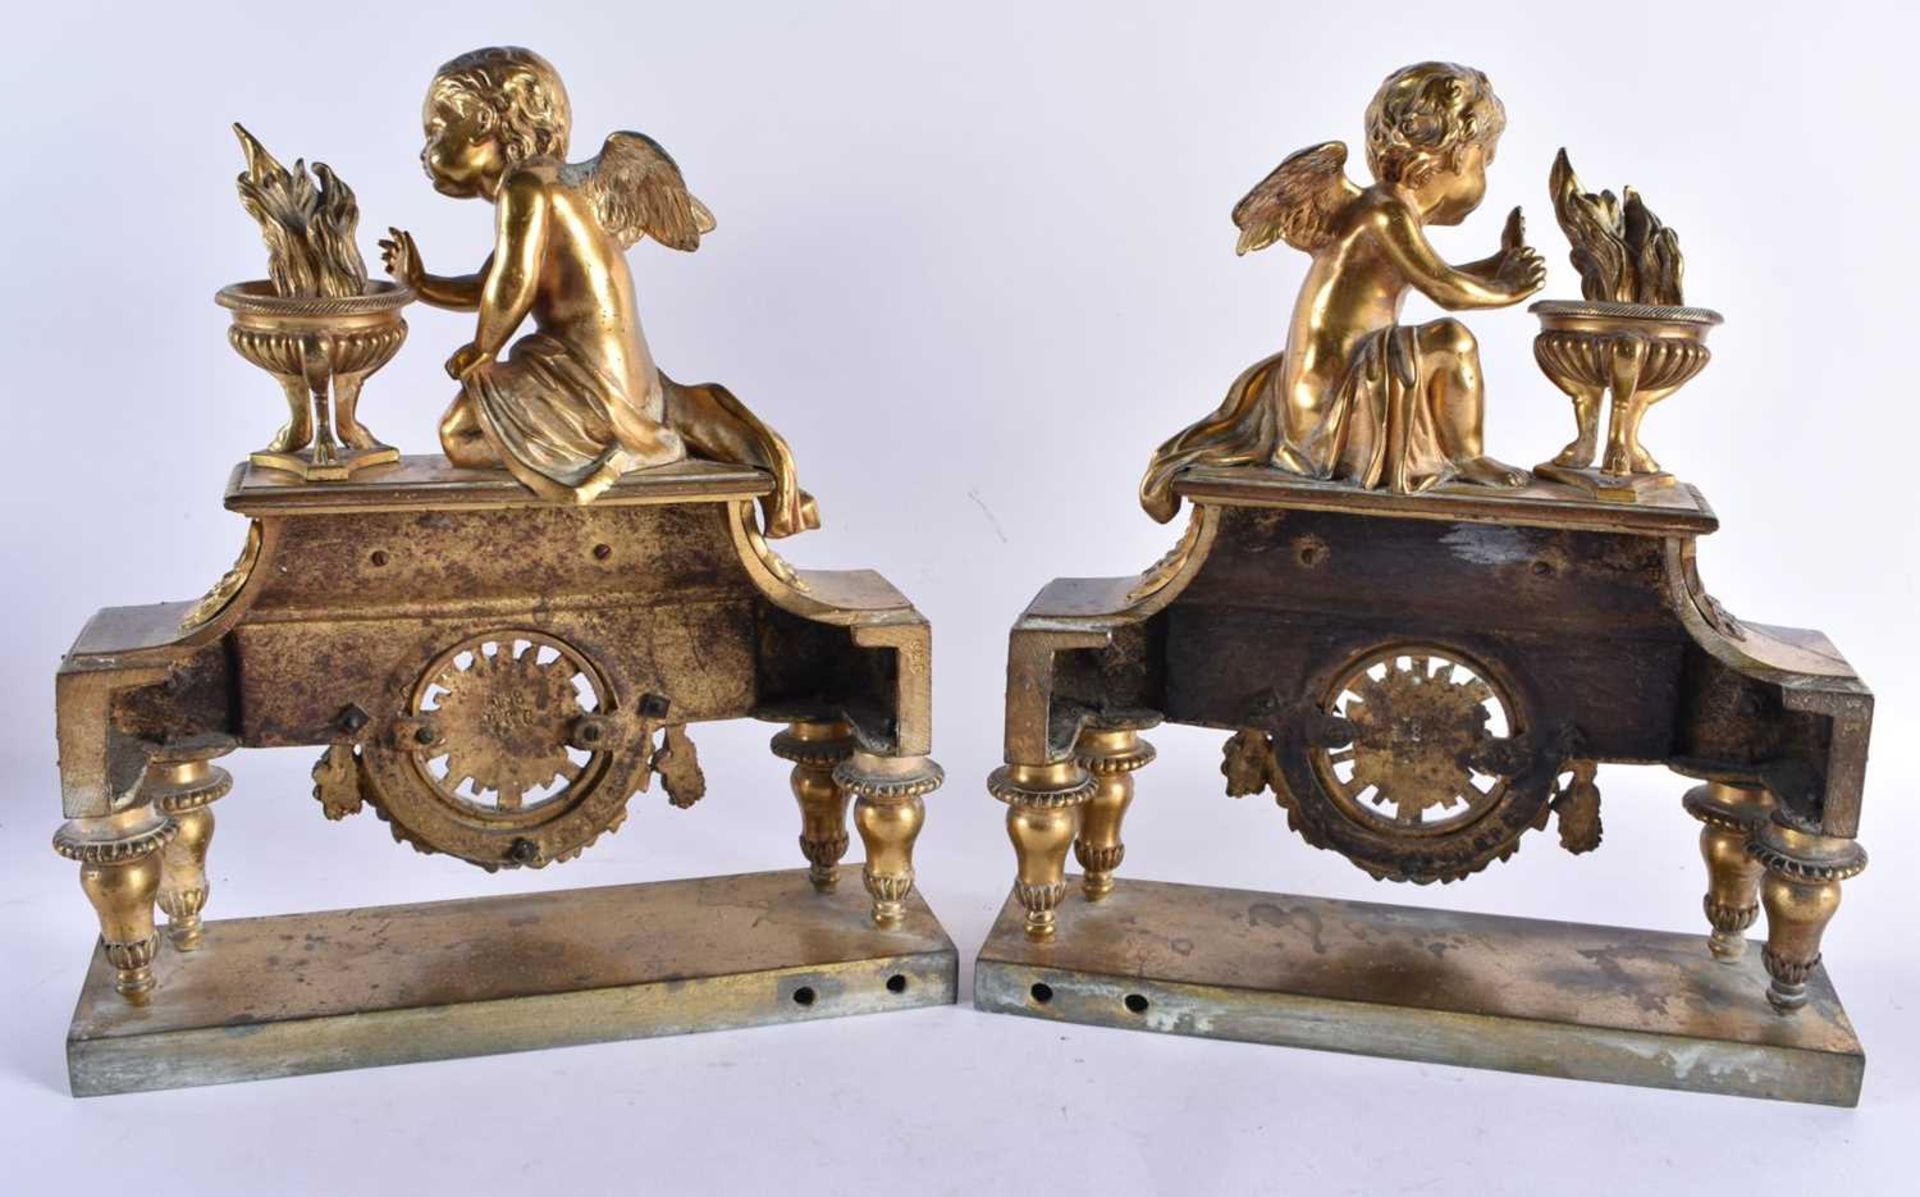 A PAIR OF EARLY 19TH CENTURY FRENCH ORMOLU FIRESIDE COMPANIONS formed as putti beside flaming vases, - Image 5 of 6